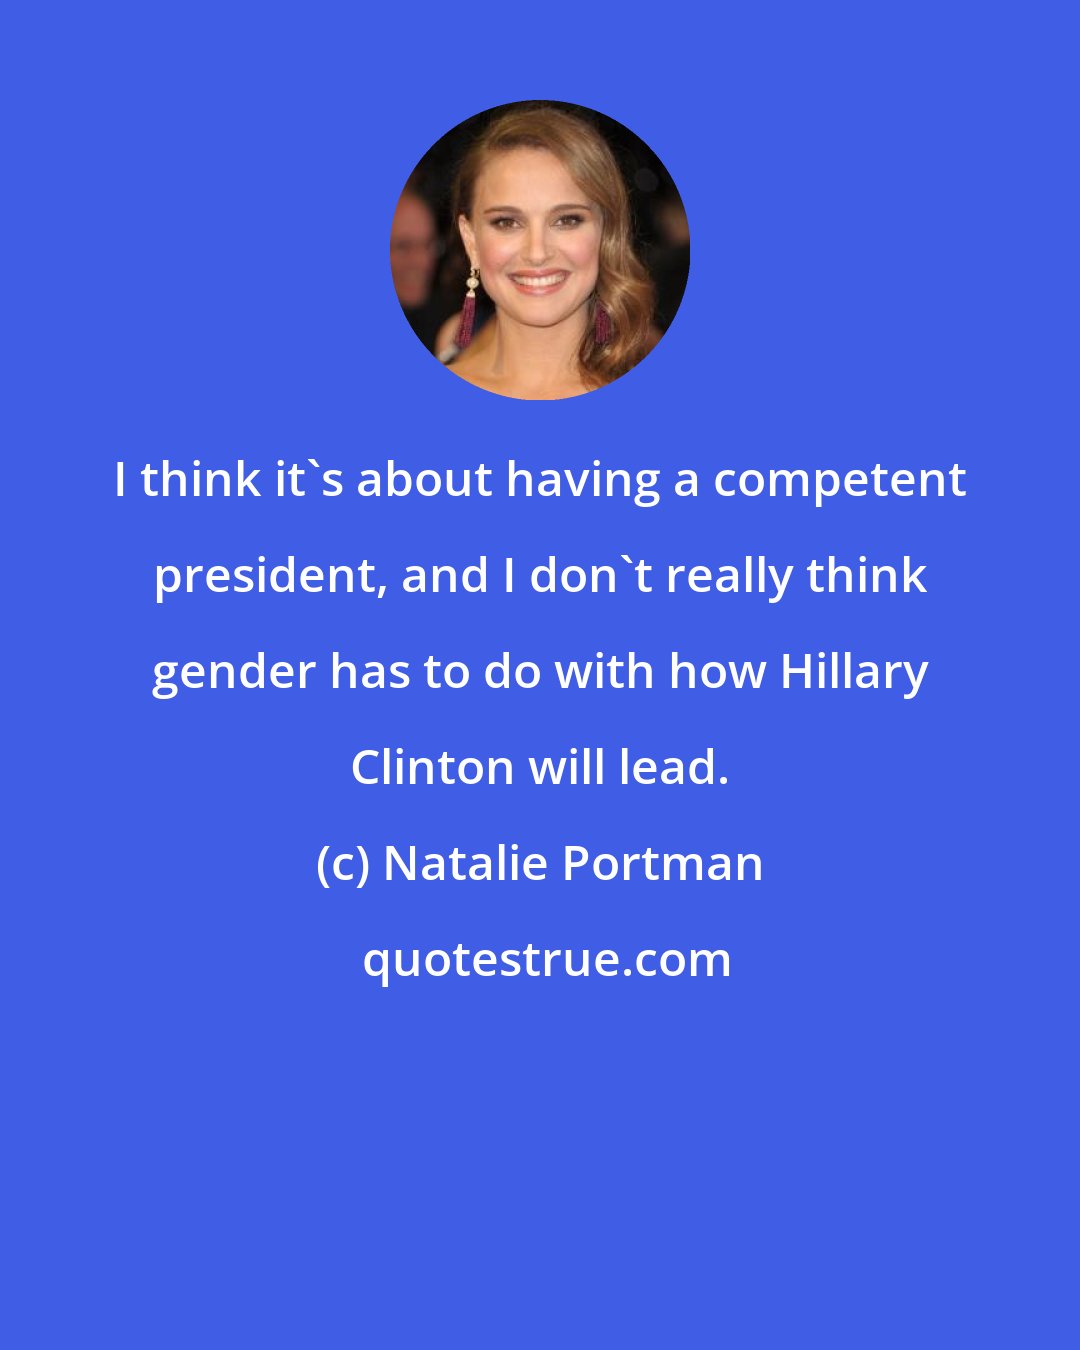 Natalie Portman: I think it's about having a competent president, and I don't really think gender has to do with how Hillary Clinton will lead.